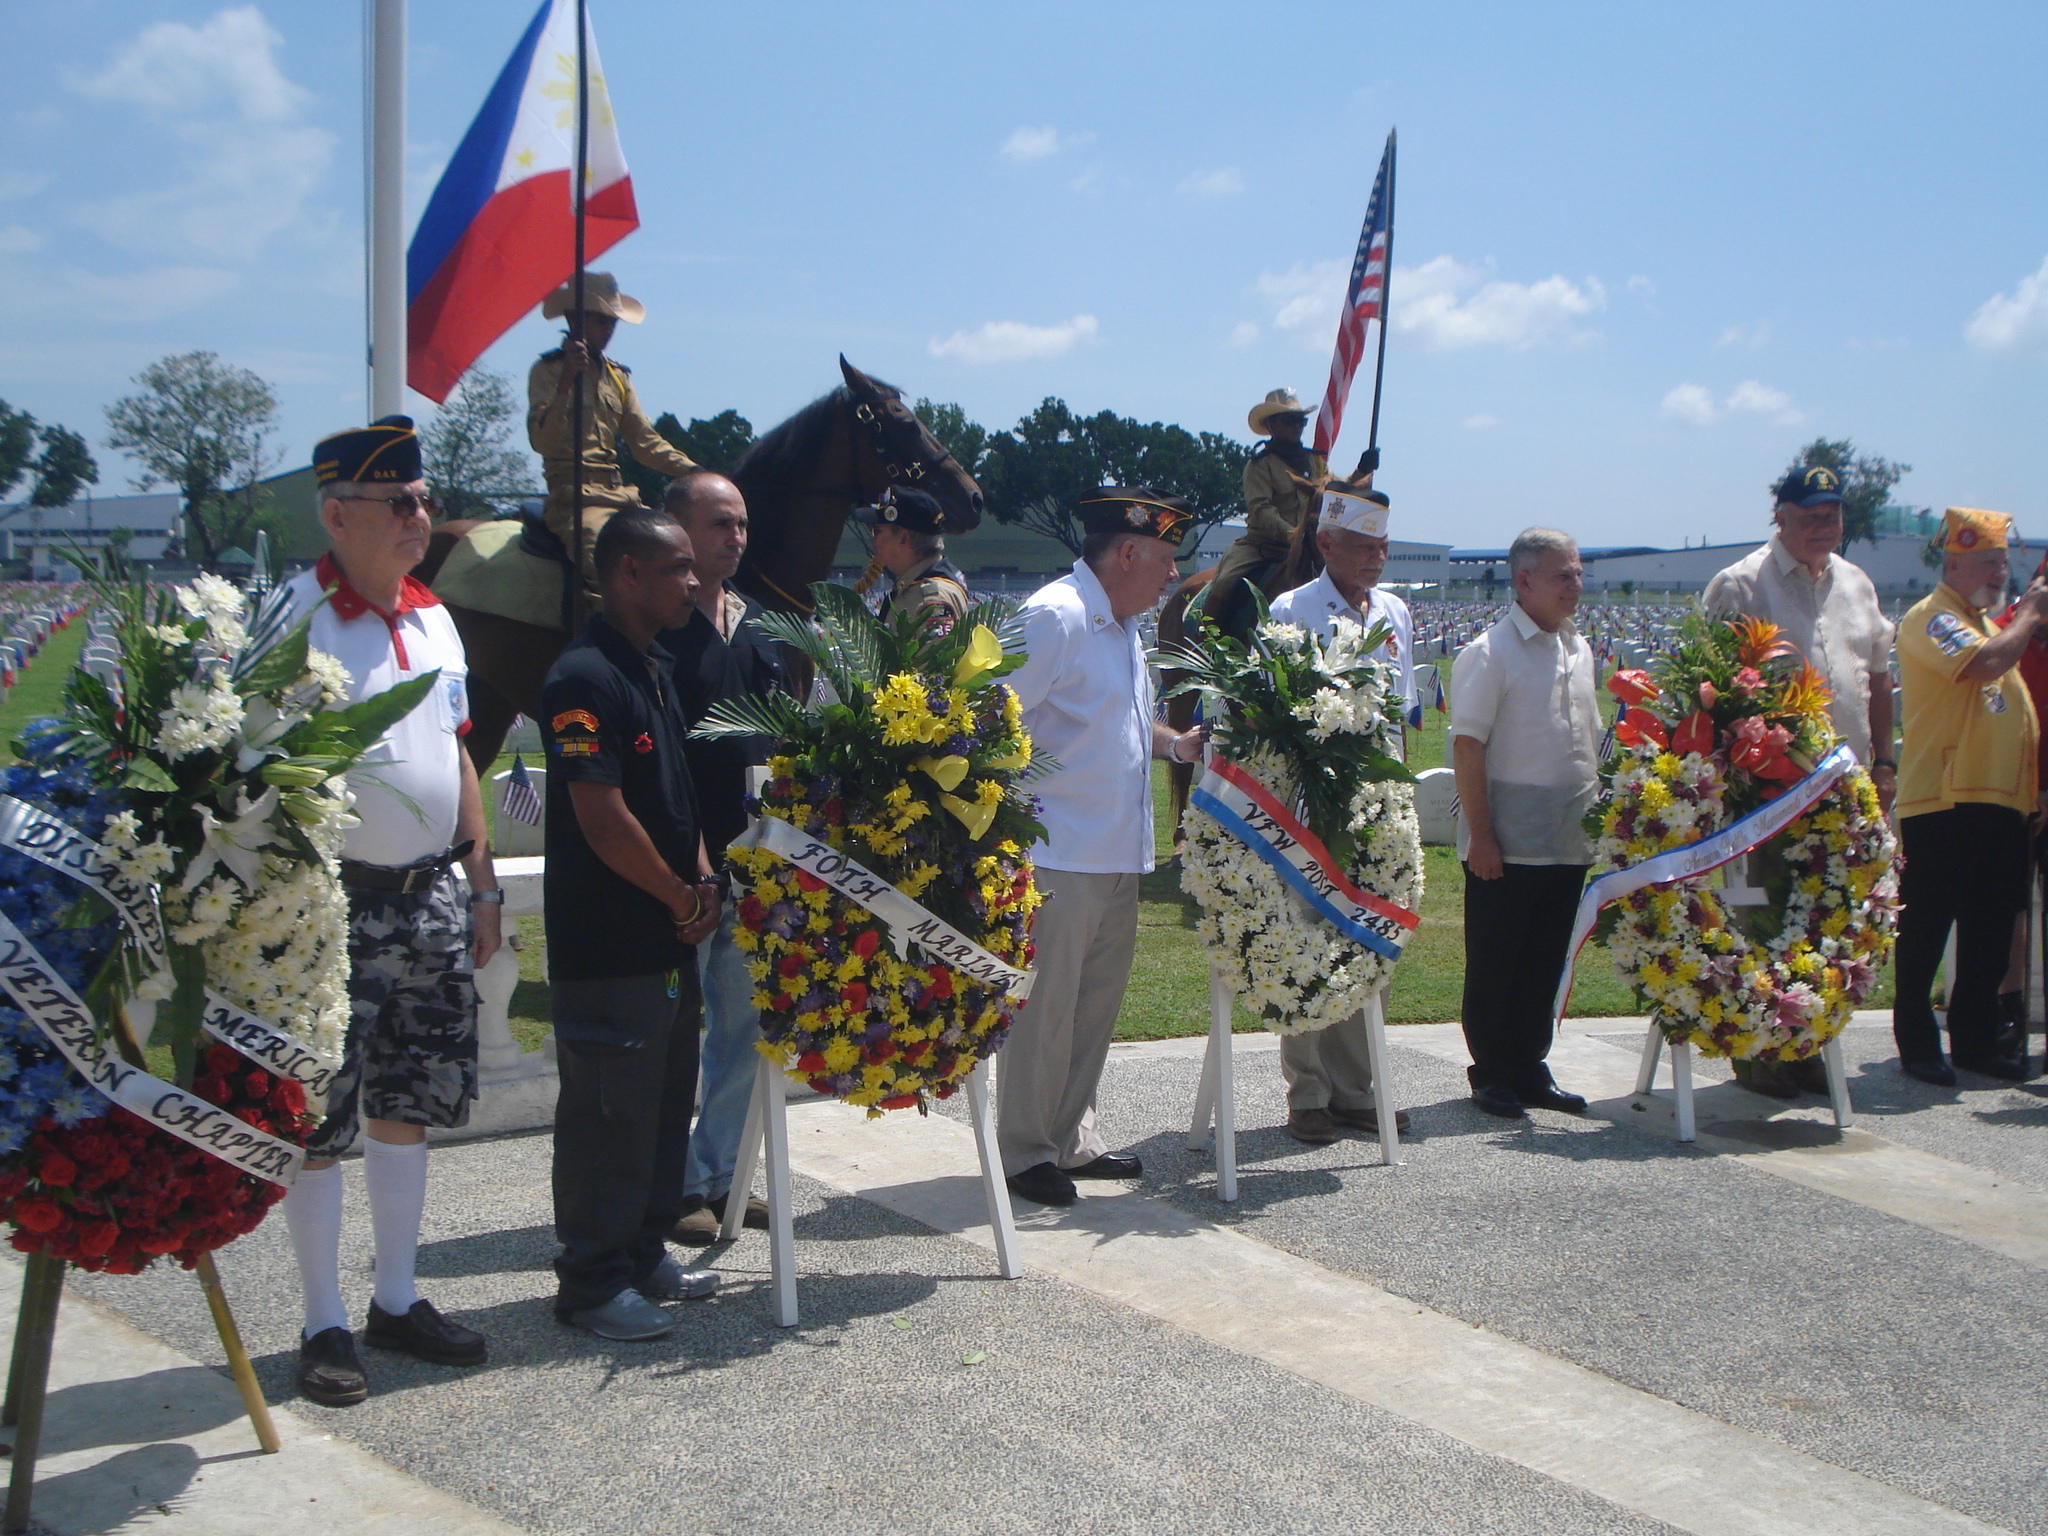 Wreath layers stand next to the floral wreaths during the ceremony. 